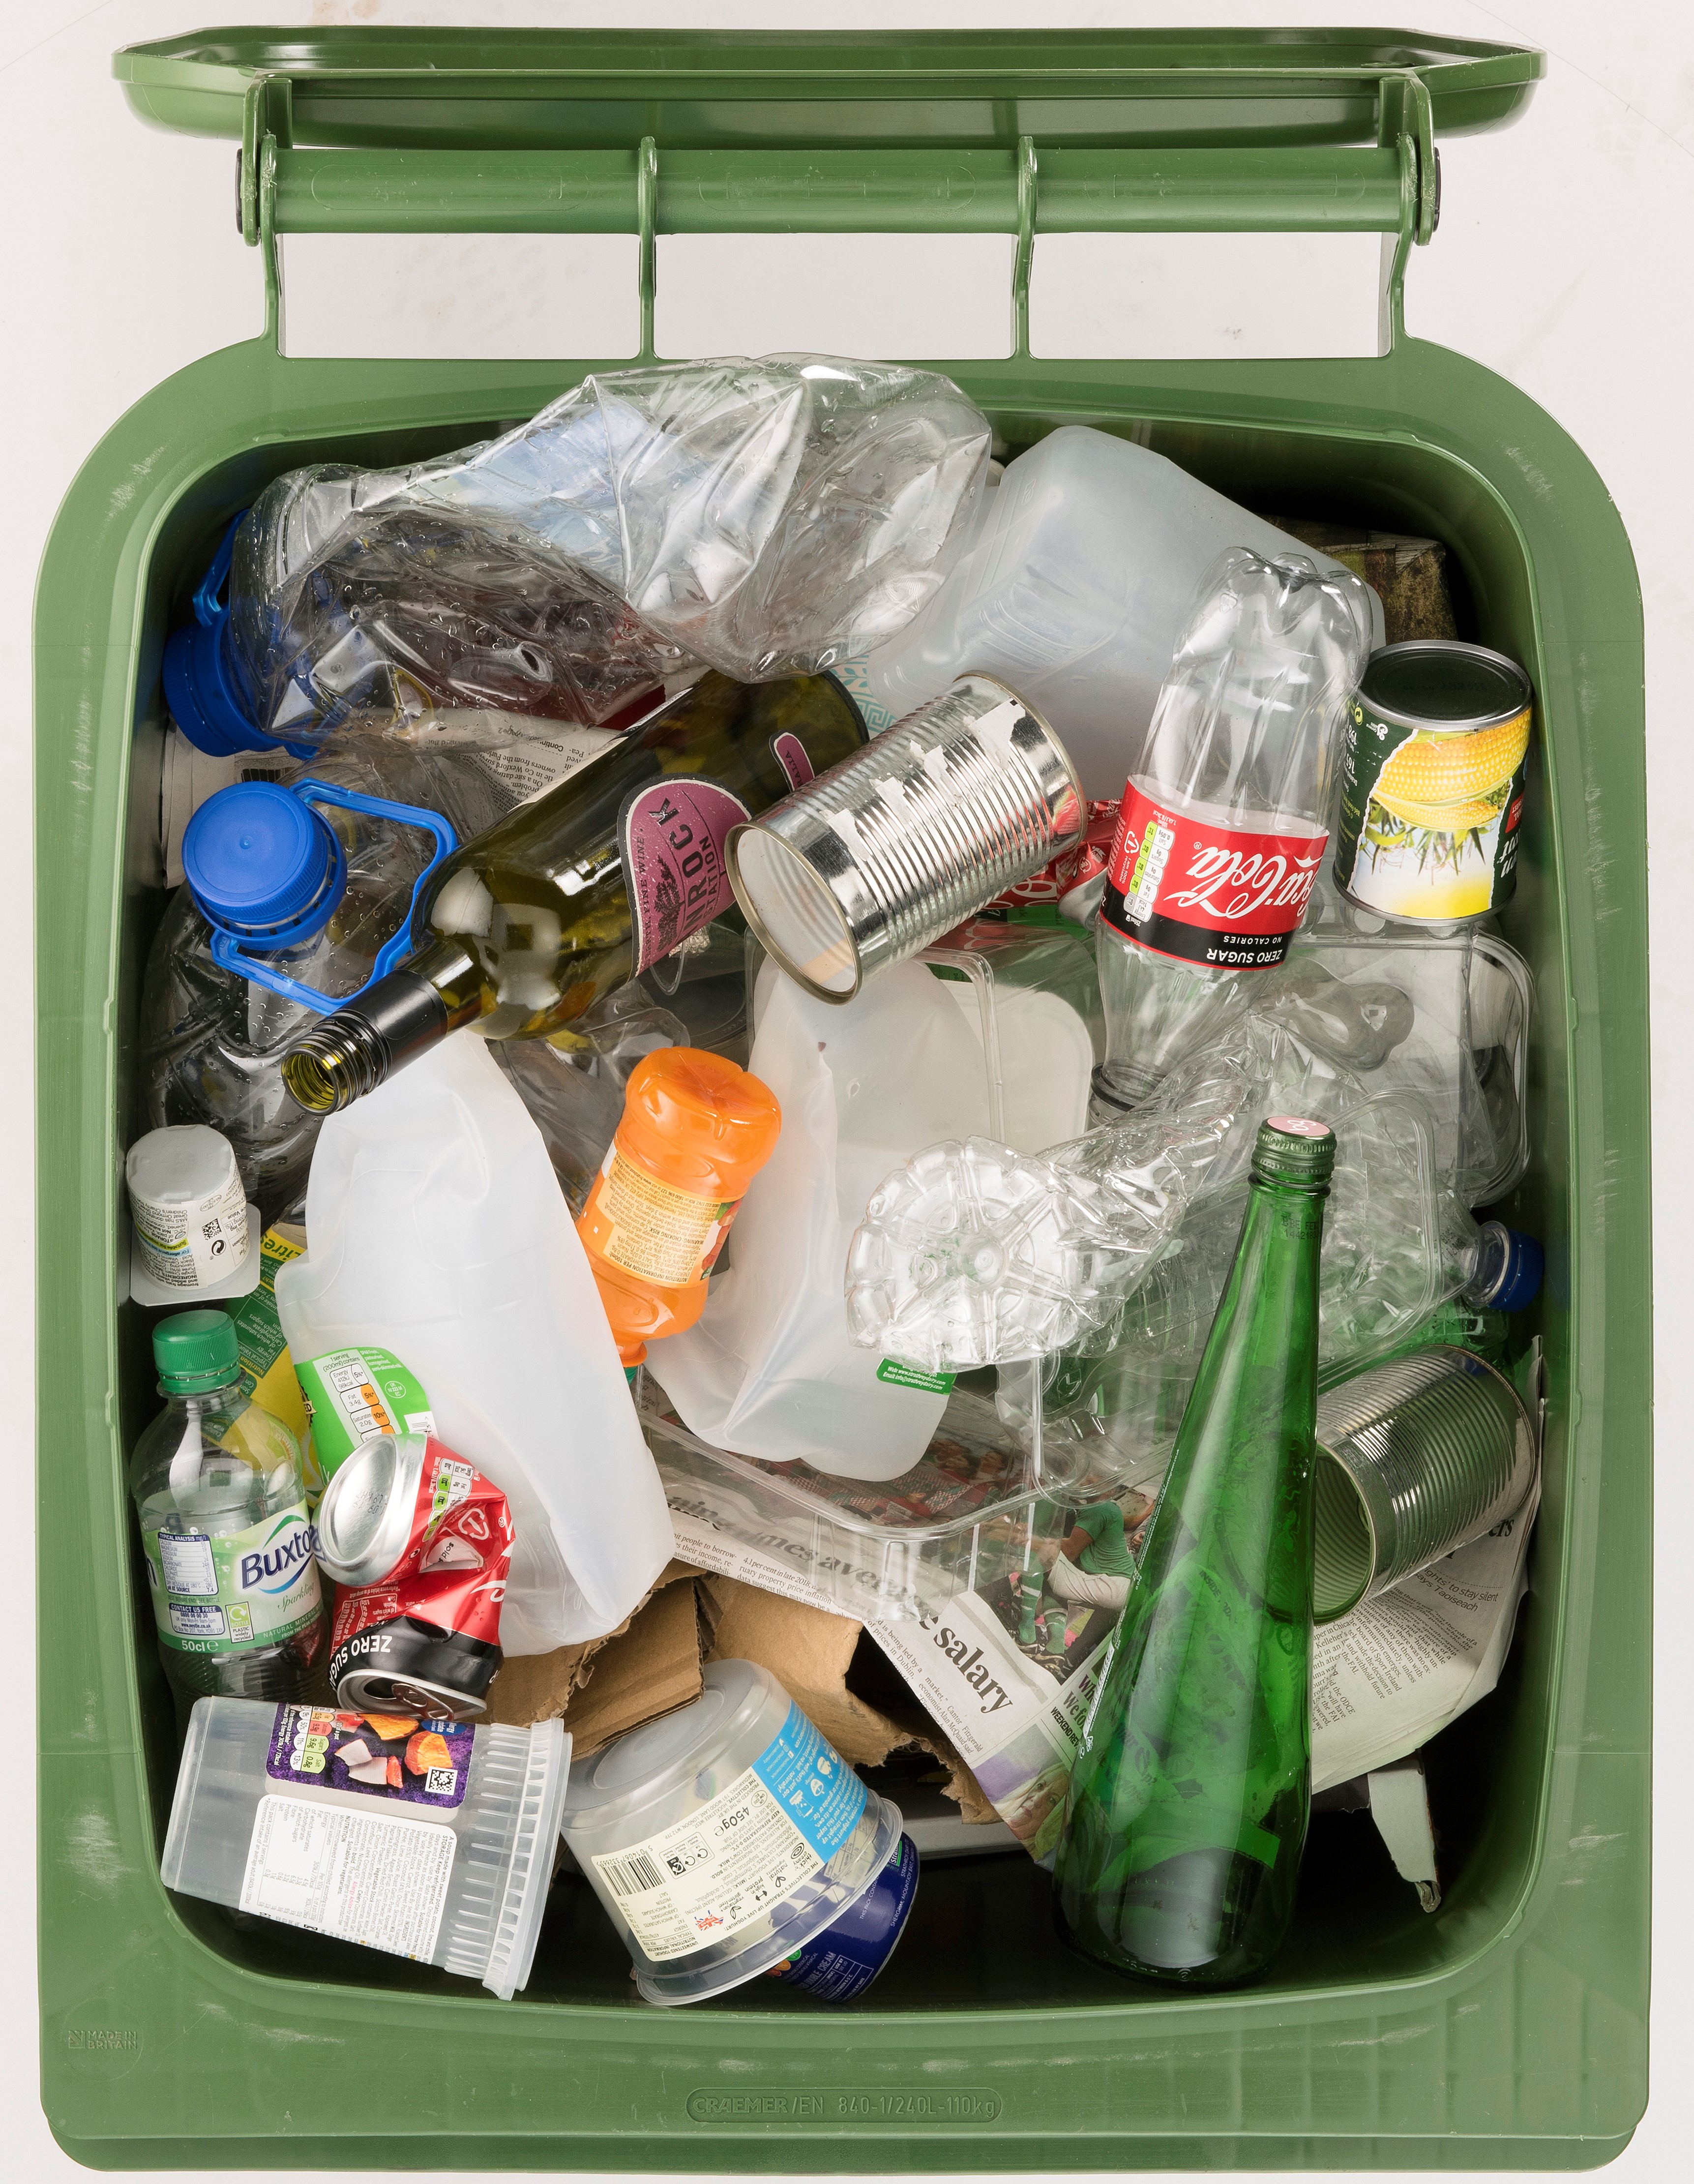 National poll reiterates need for simplicity and convenience in council recycling services